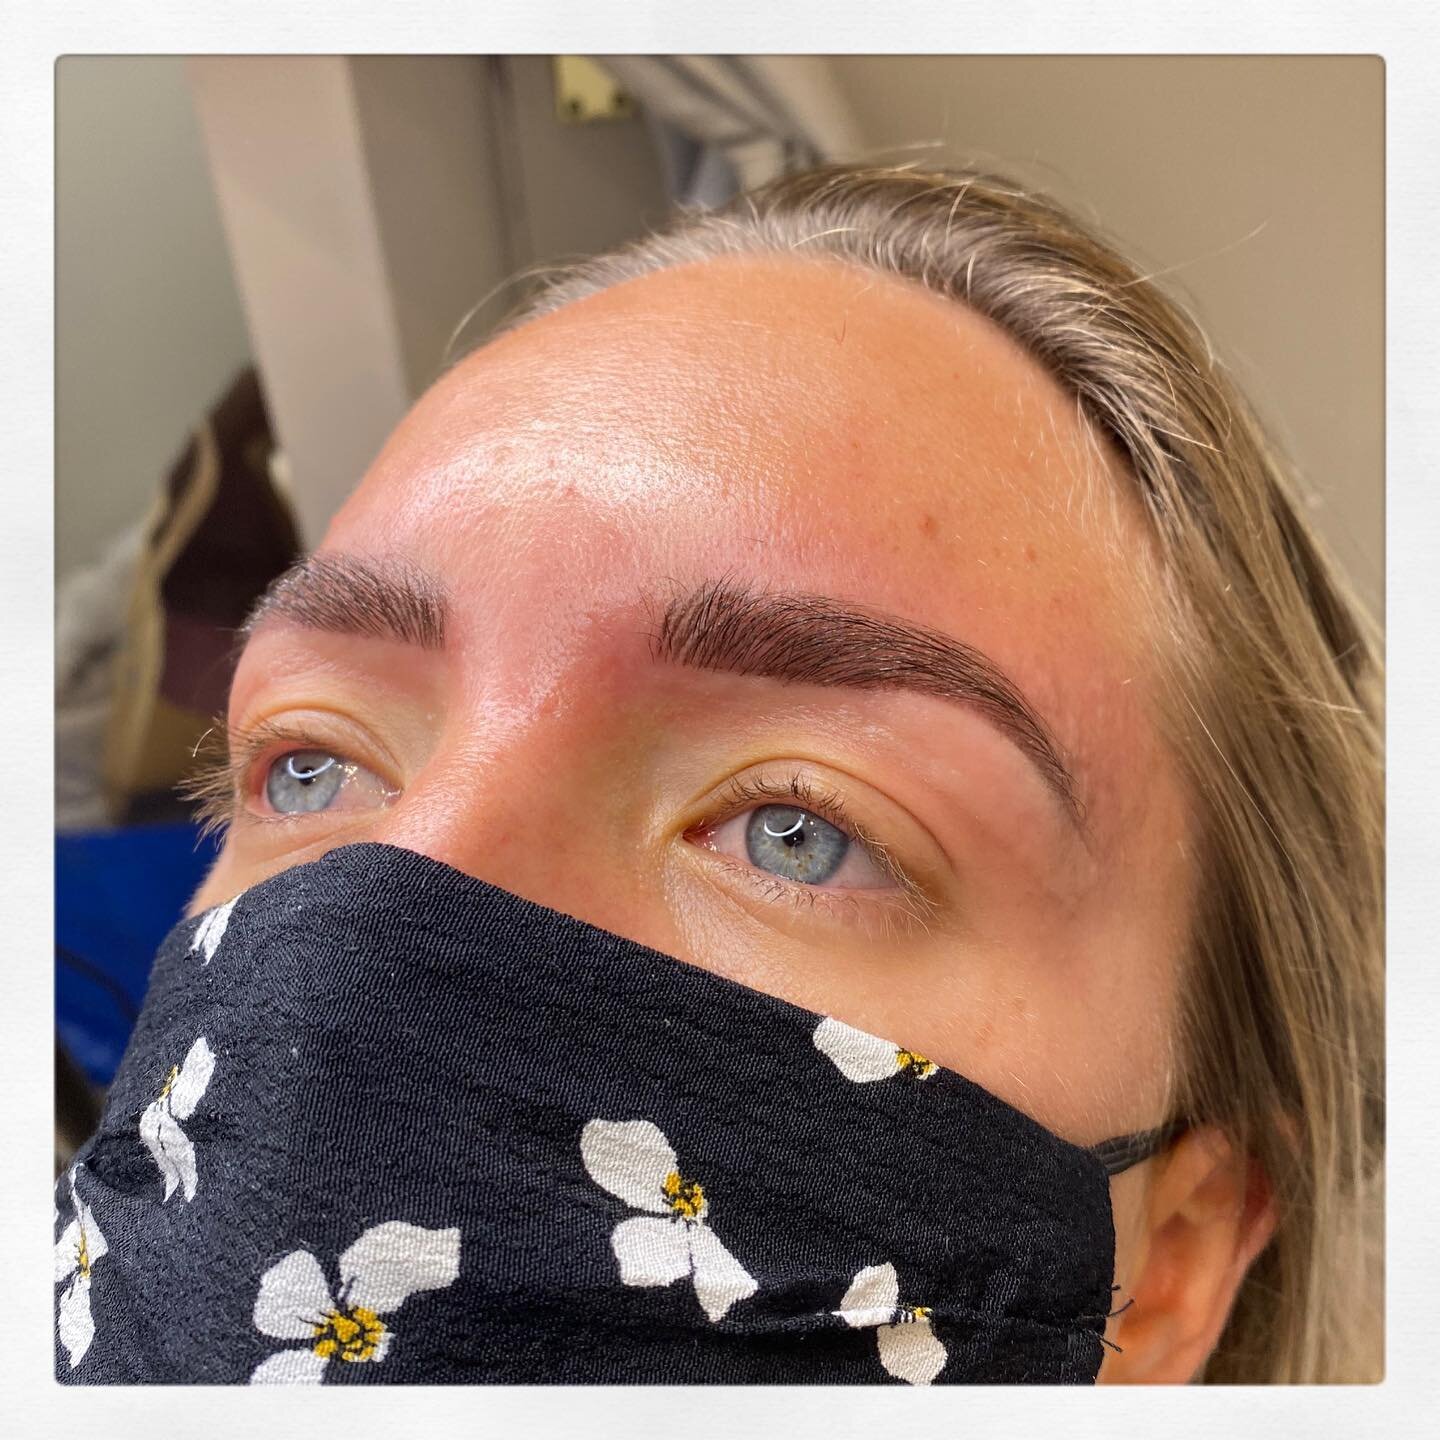 HD Brows today!

Check out our story&rsquo;s for a Before + After 📸

If you look closely you can see how we added some hair strokes at the front using @hdbrowsofficial Pro pencil,to fill in the gaps.

#brighton #brightonbrows #shoreham #shorehambrow